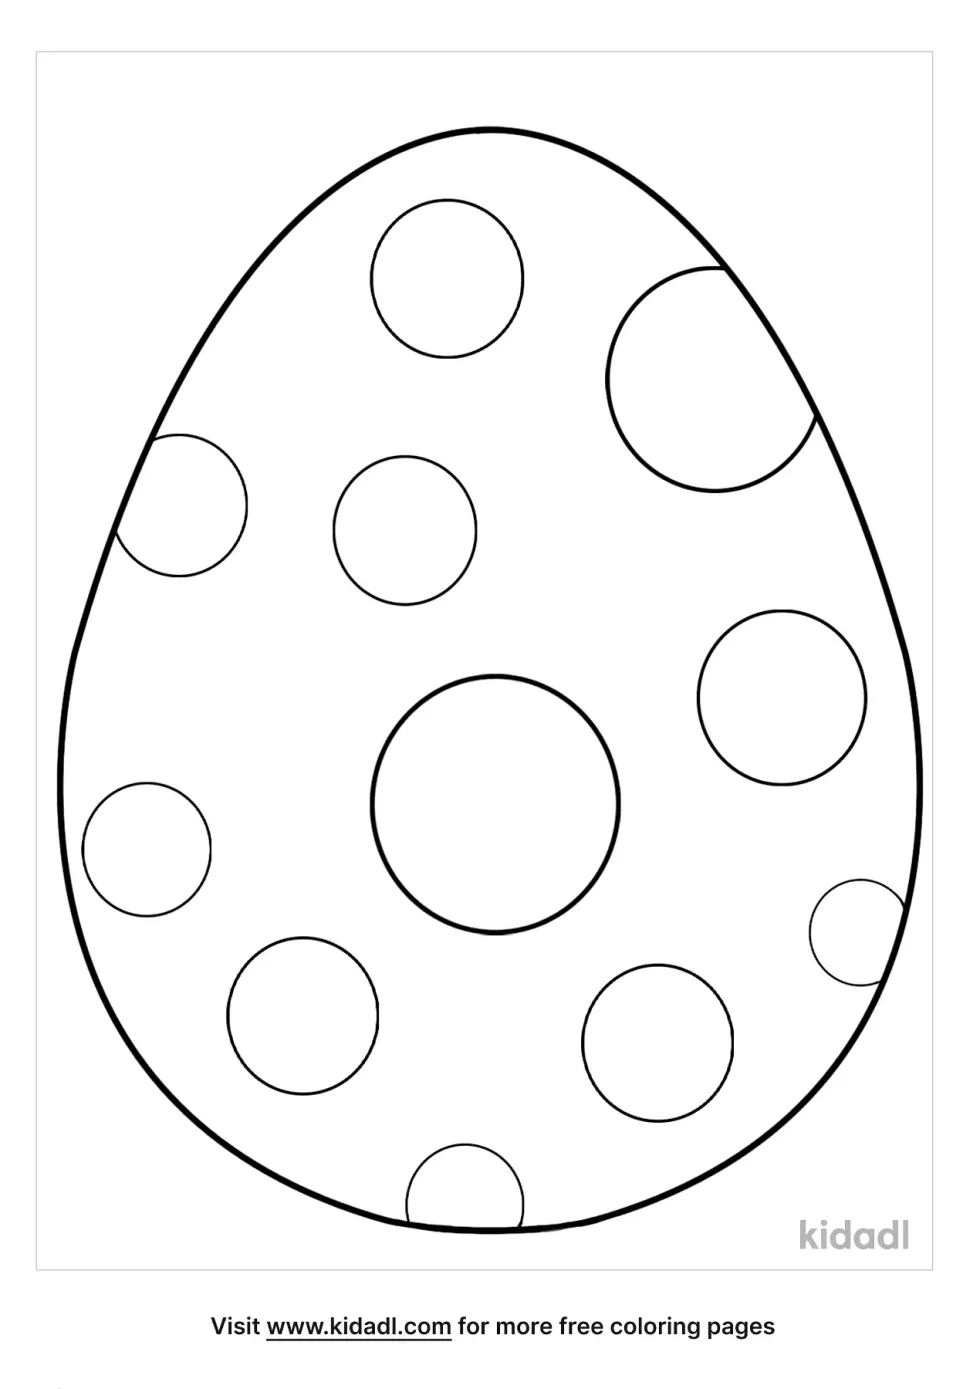 Blank Easter Egg Coloring Page